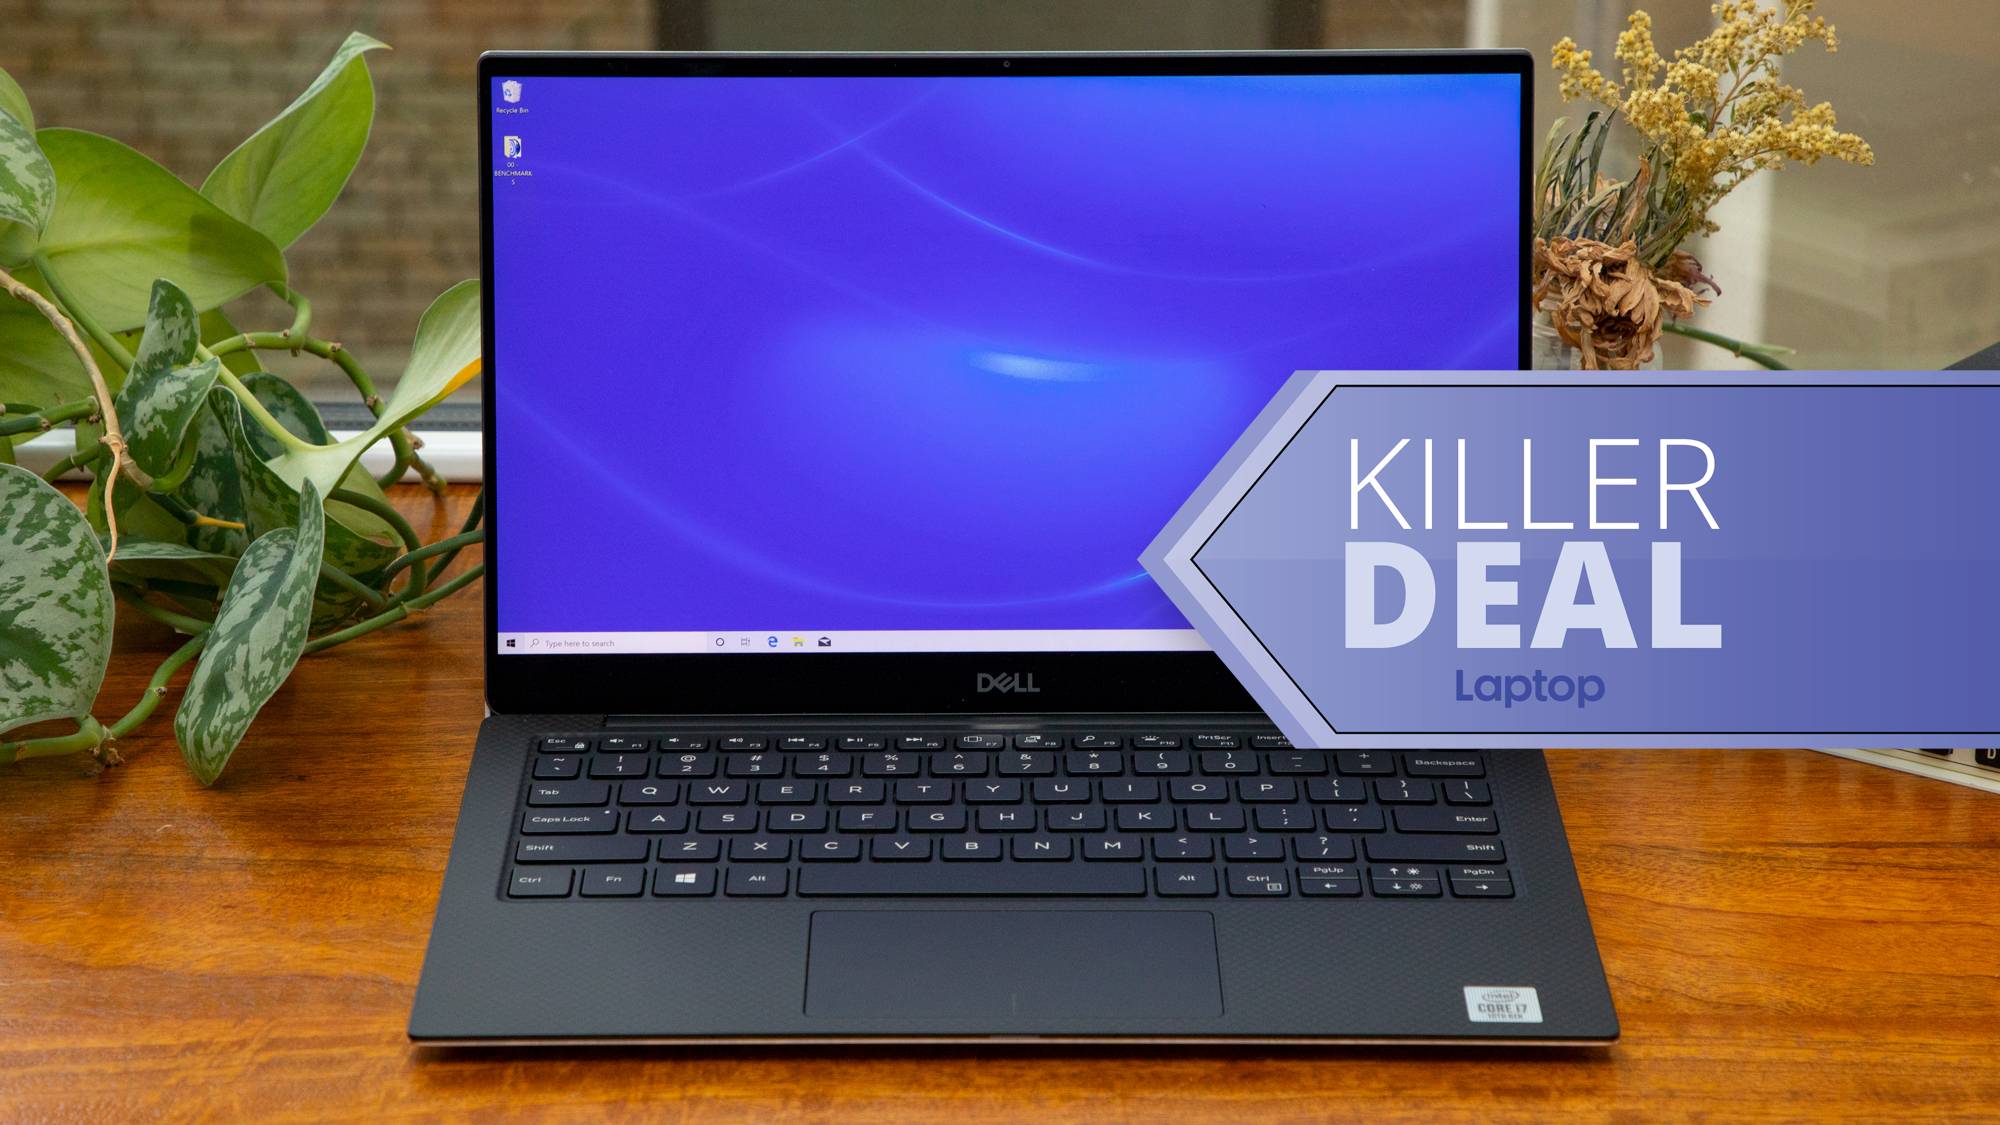 XPS 13 drops to $679 in Dell back-to-school laptop sale | Laptop Mag